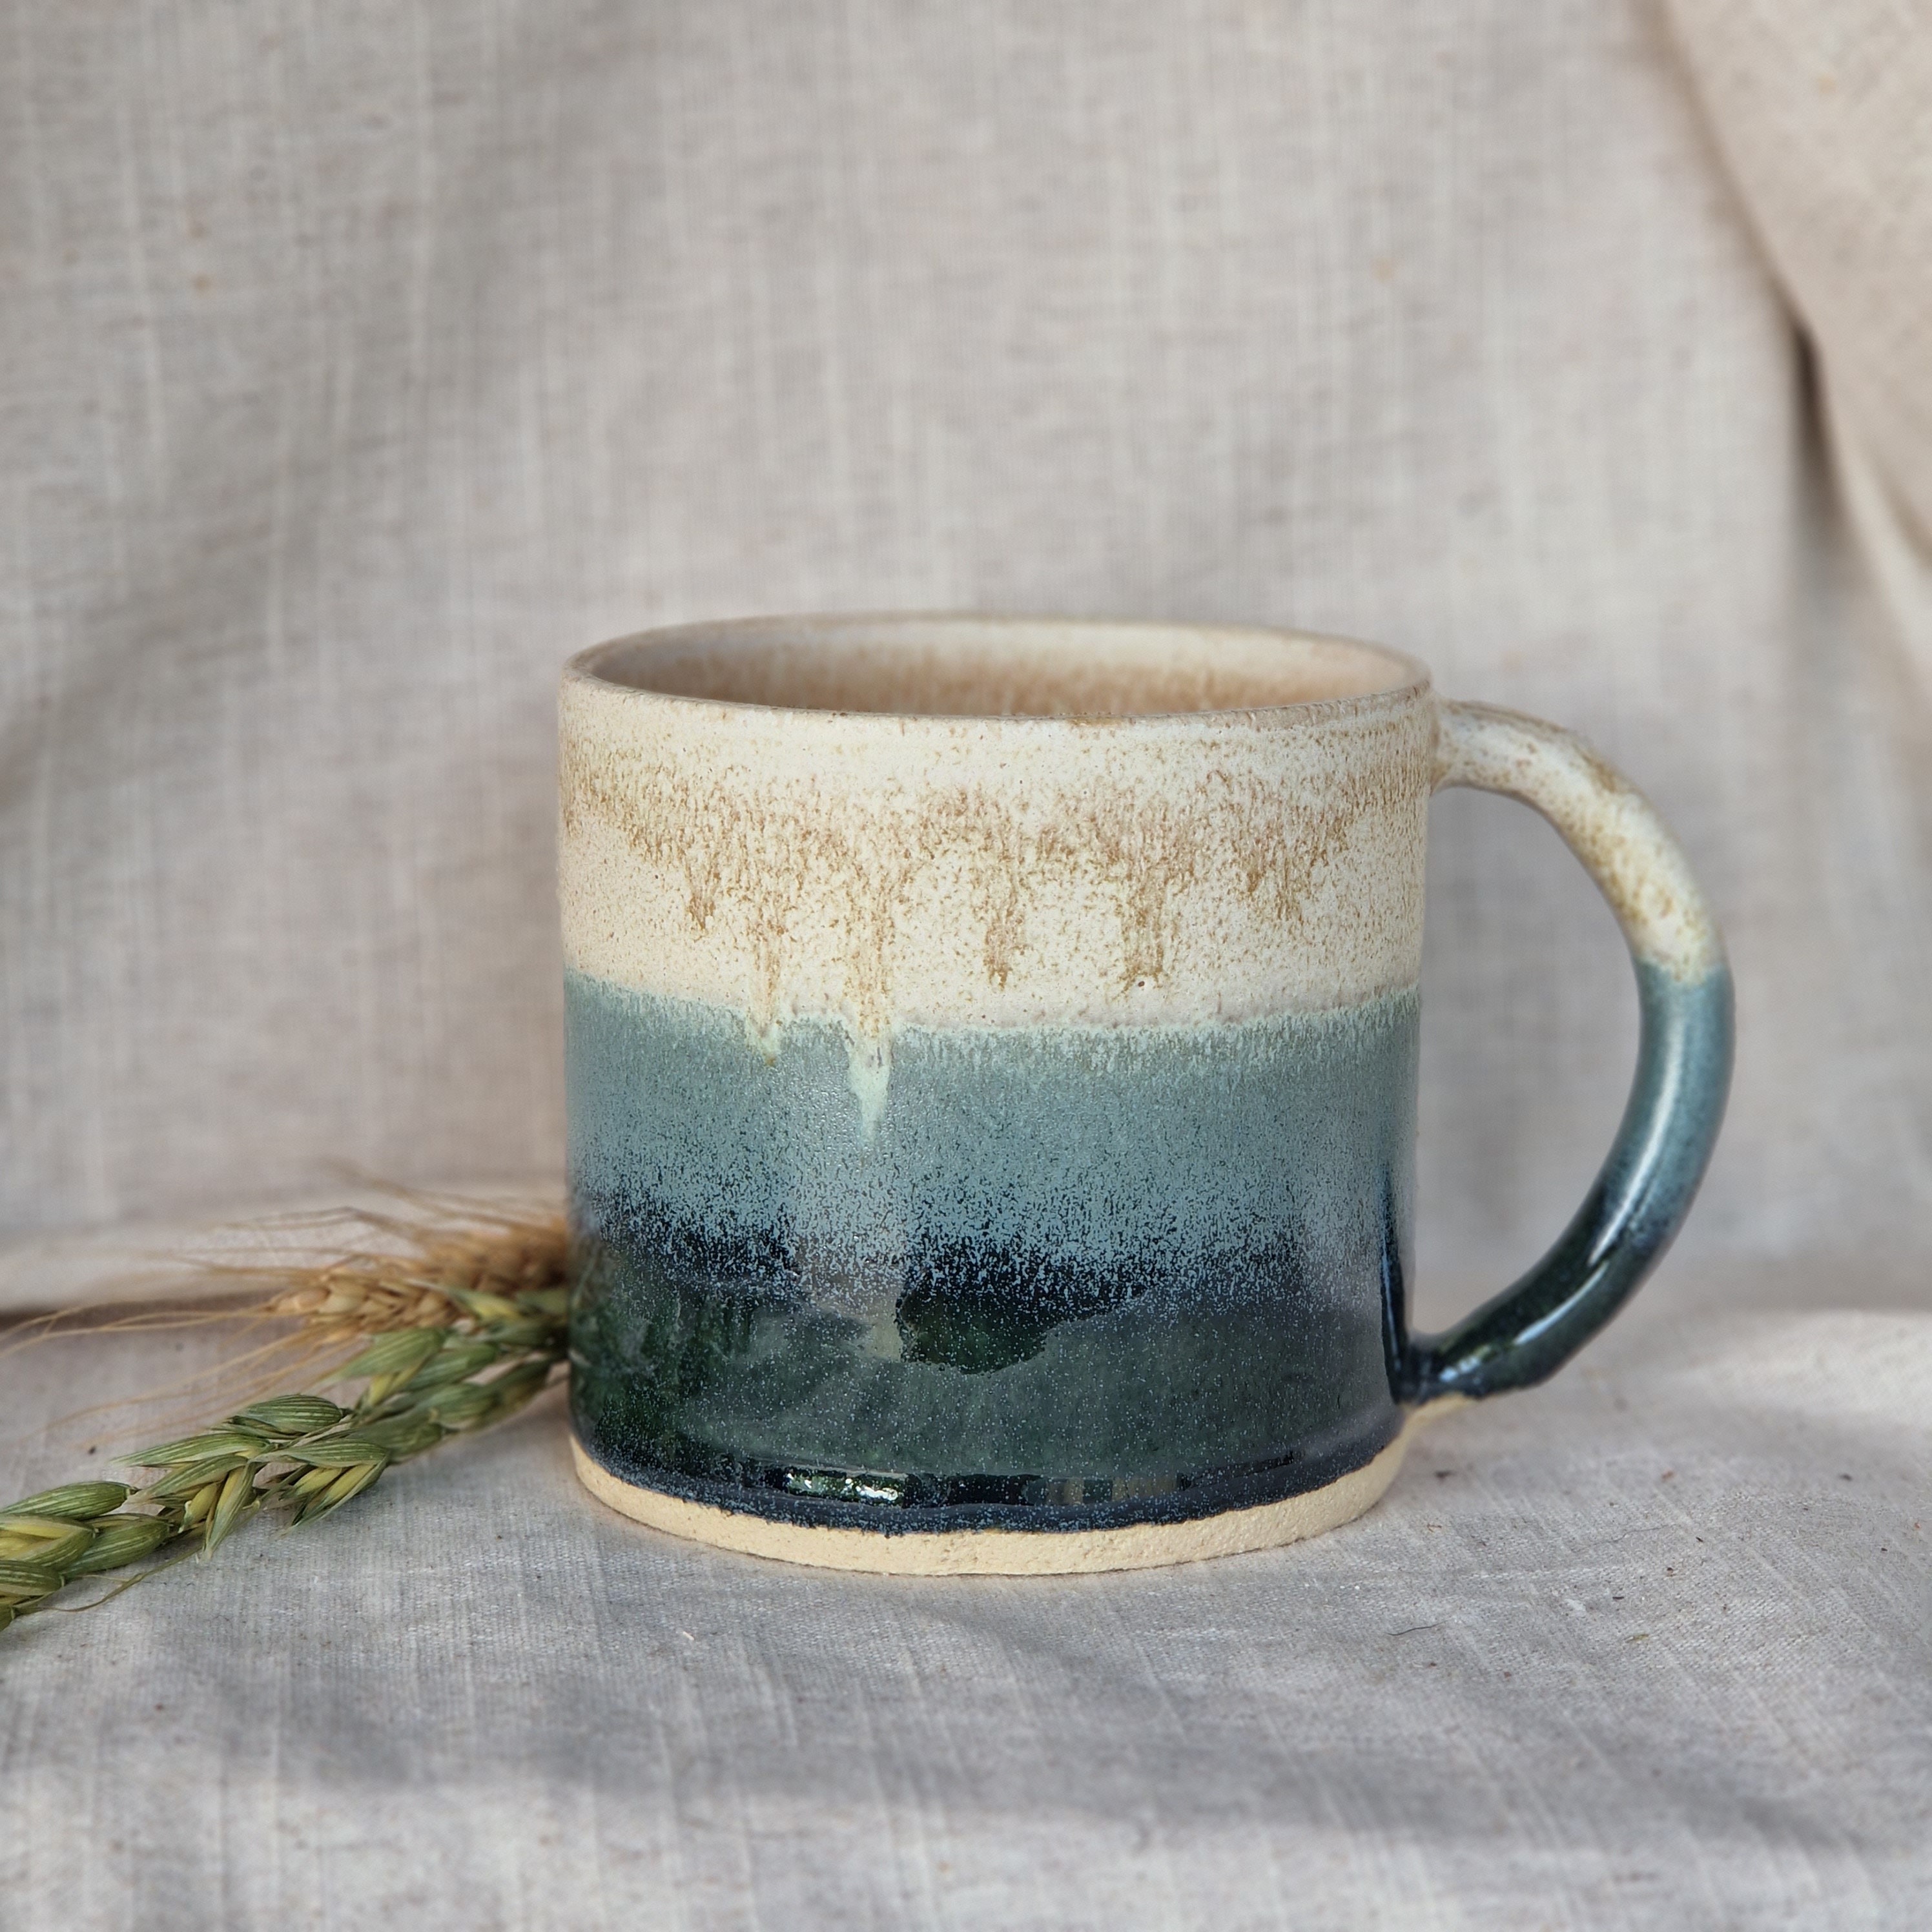 Gave my first crystalline glaze workshop and this is the mug I made/glazed  as an example. : r/Pottery